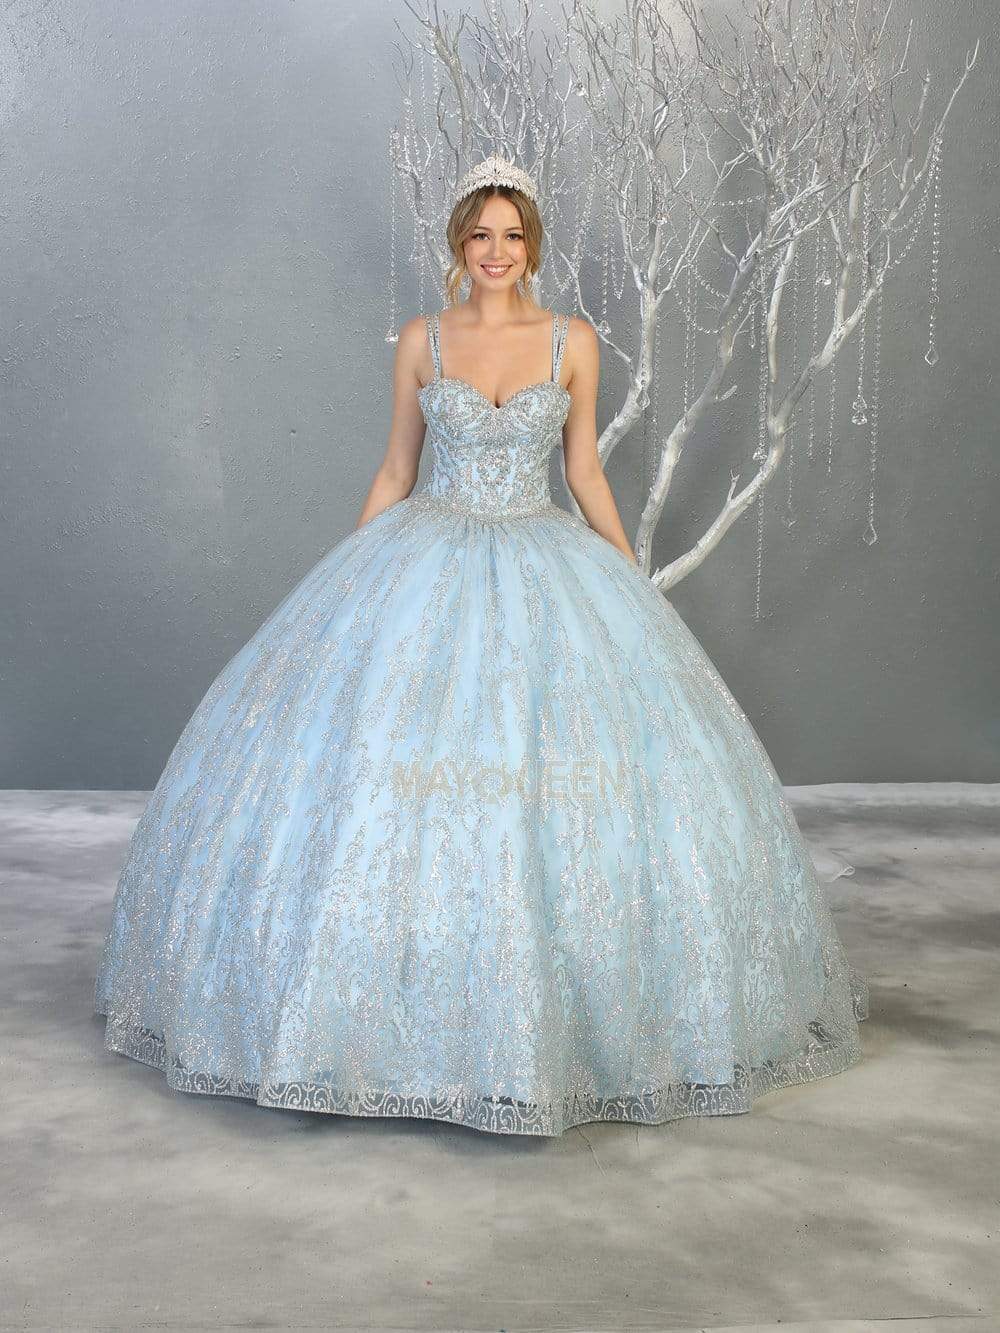 Image of May Queen - LK145 Glitter Embellished Sweetheart Ballgown